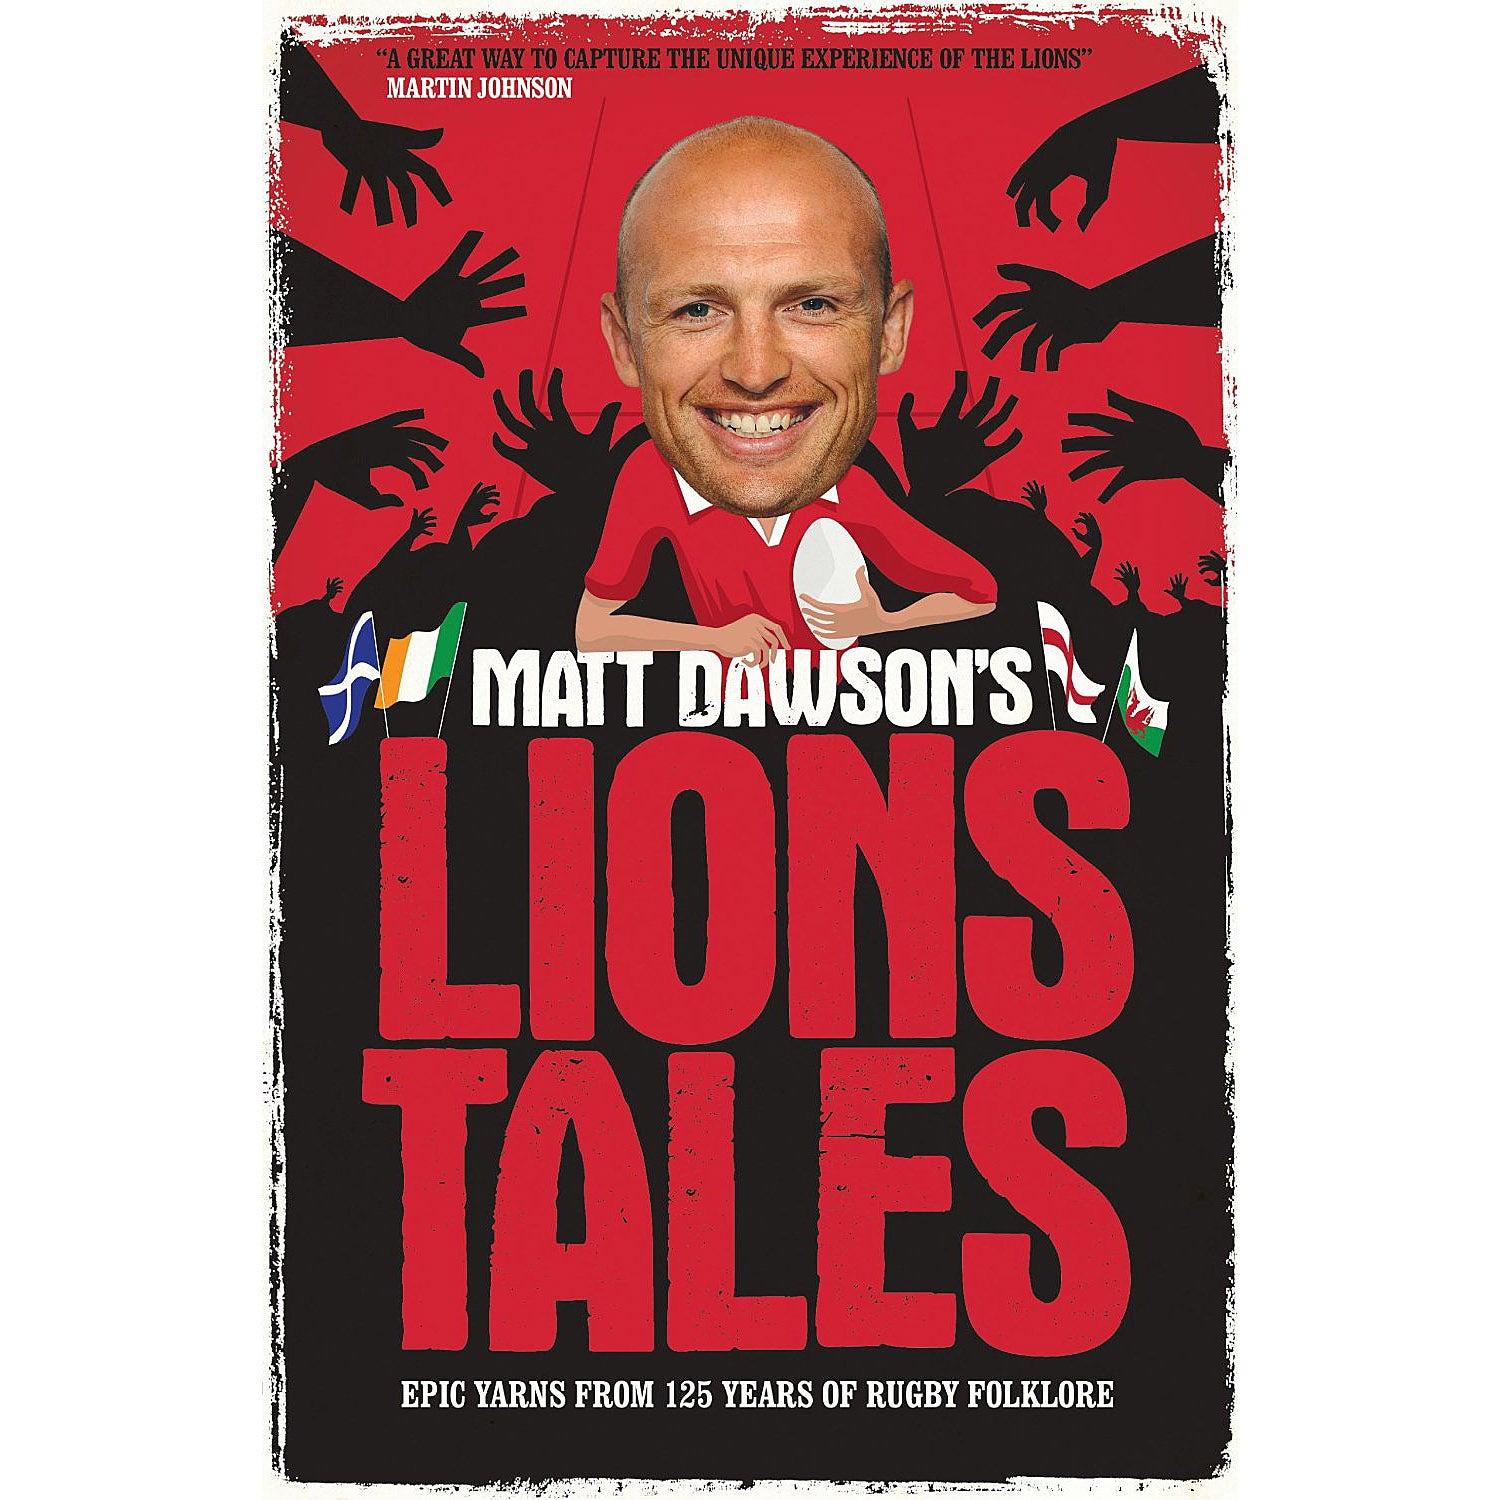 Matt Dawson's Lions Tales – Epic Yarns from 125 Years of Rugby Folklore – Softback Price